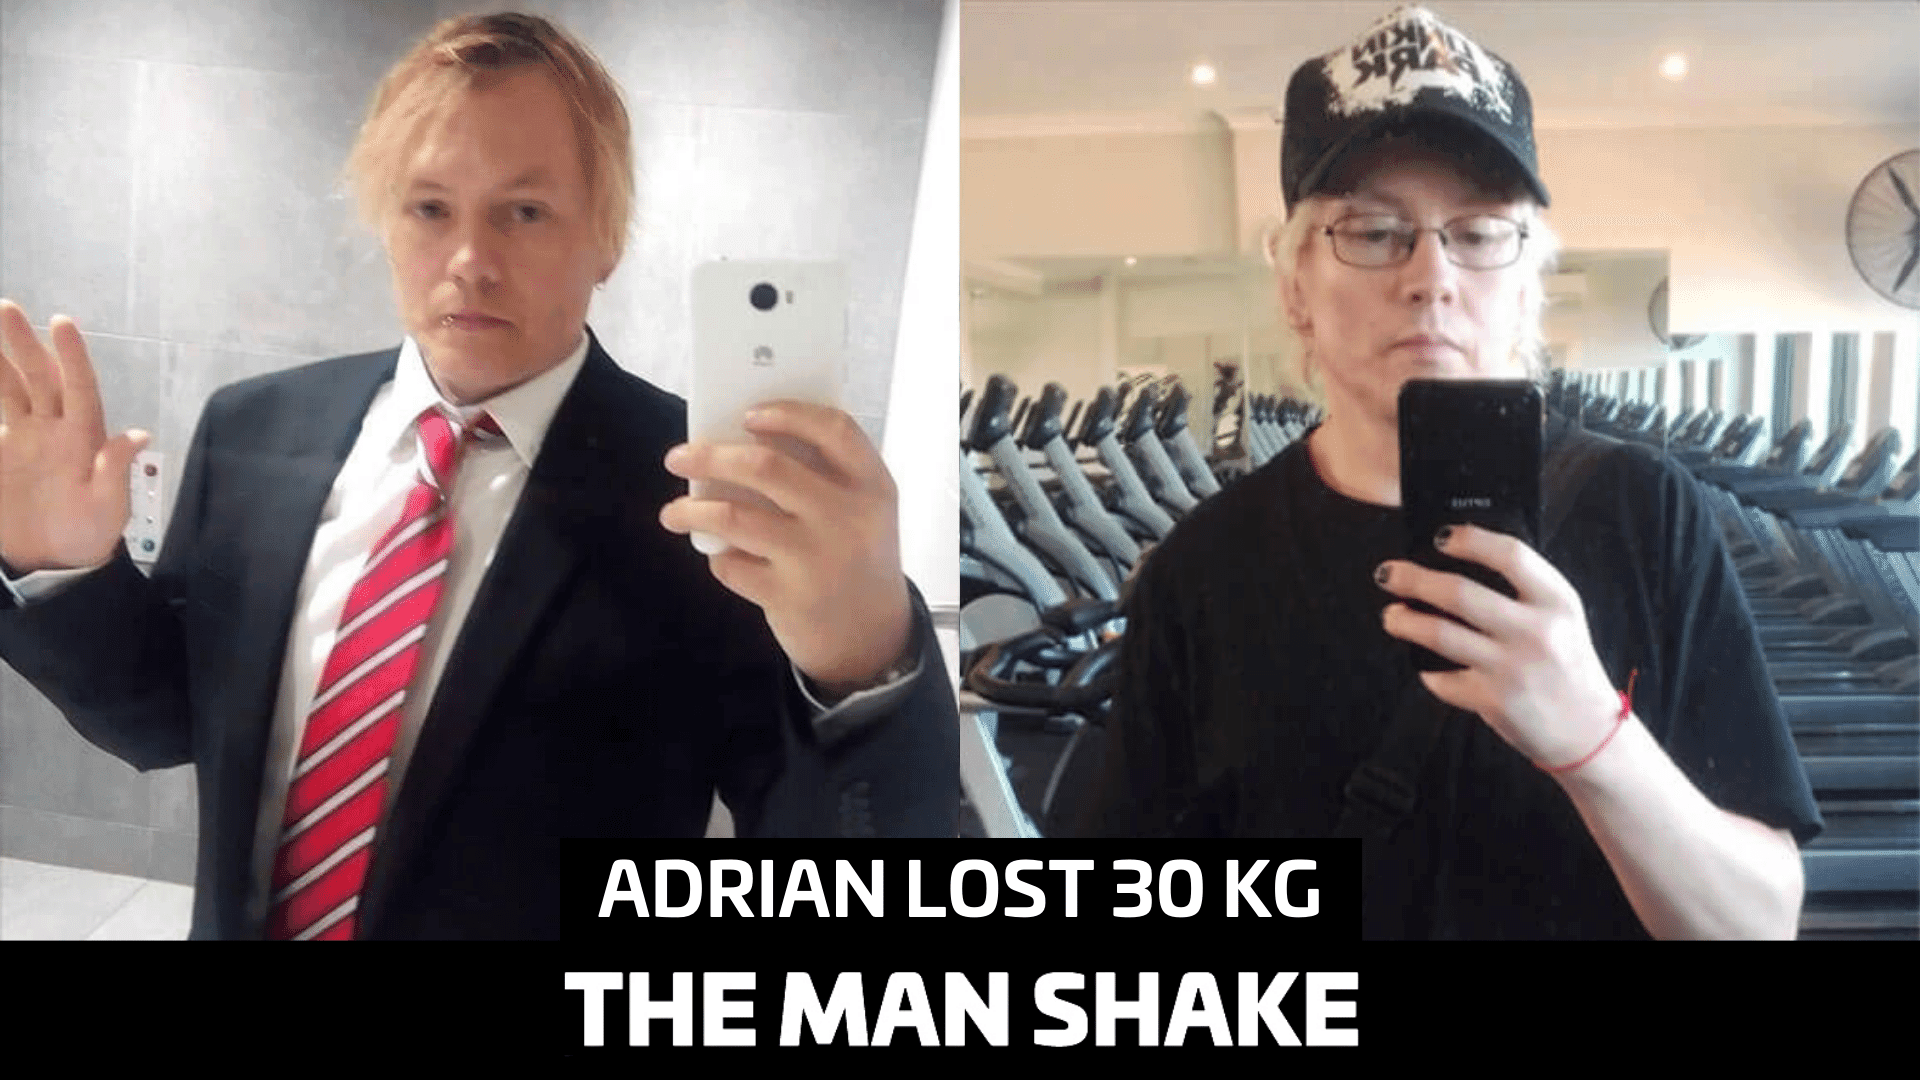 Adrian took control of his depression and lost 30kg